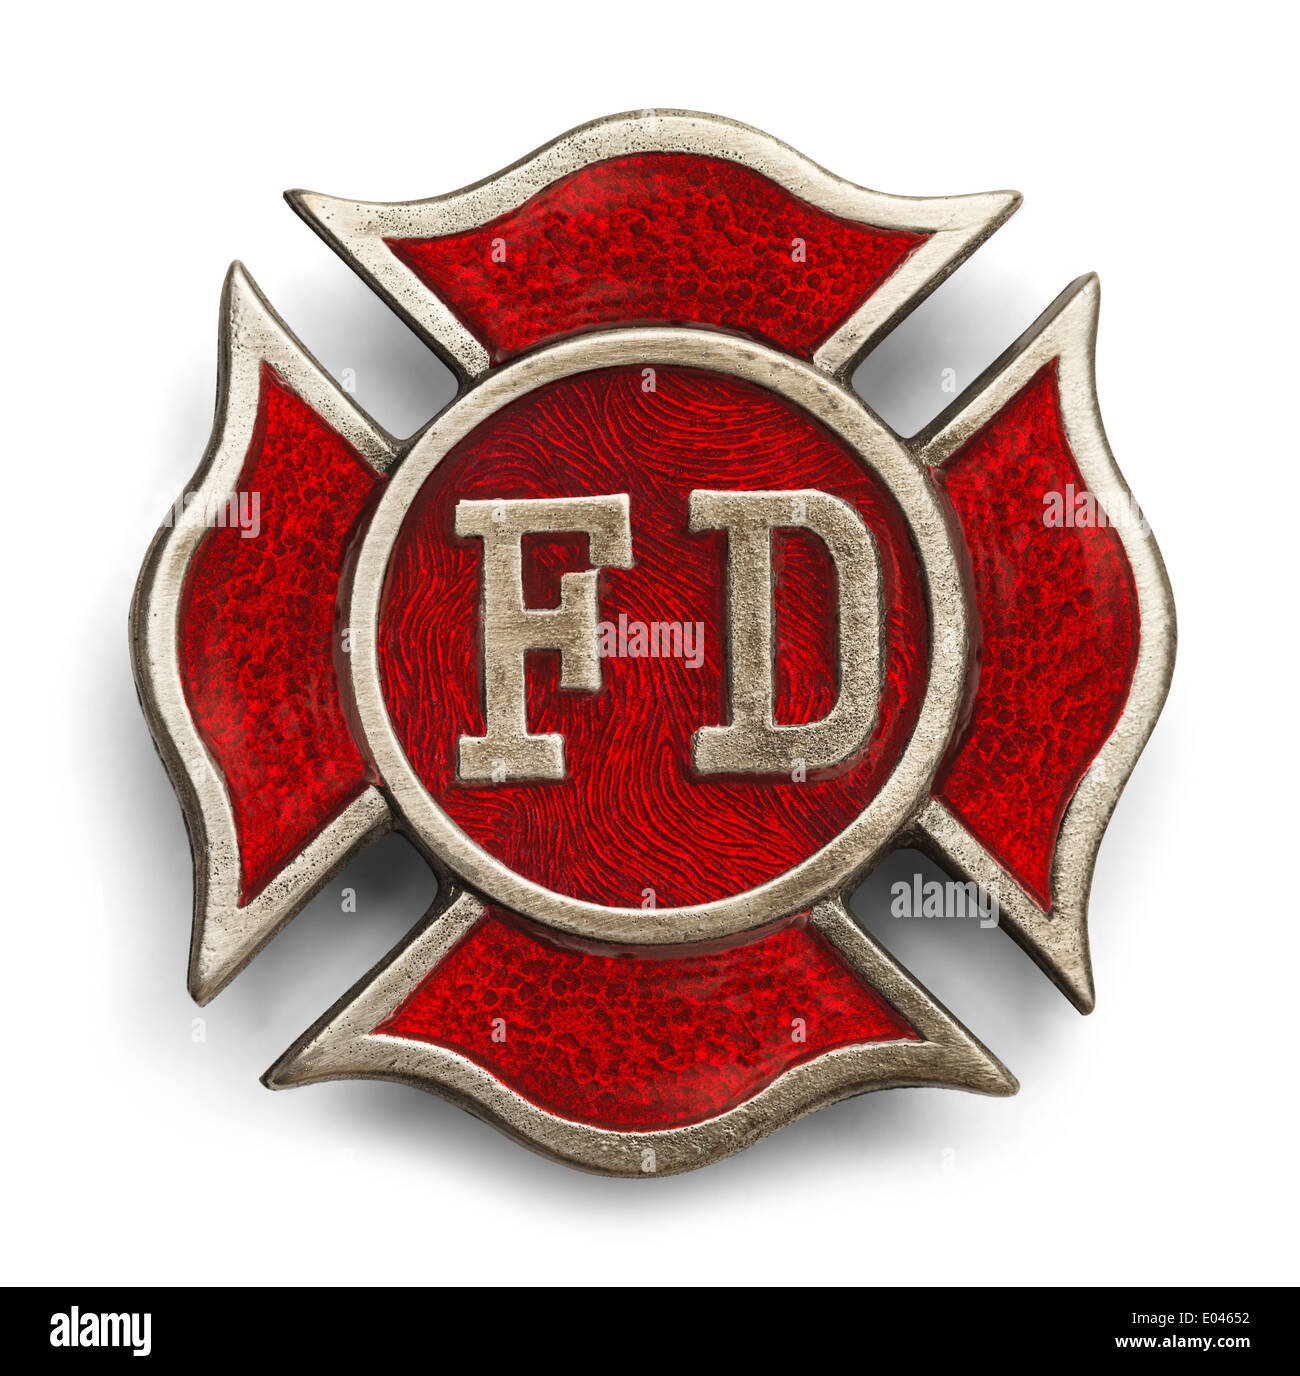 Red Cross Fire Fighter Symbol Isolated on White Background. Stock Photo